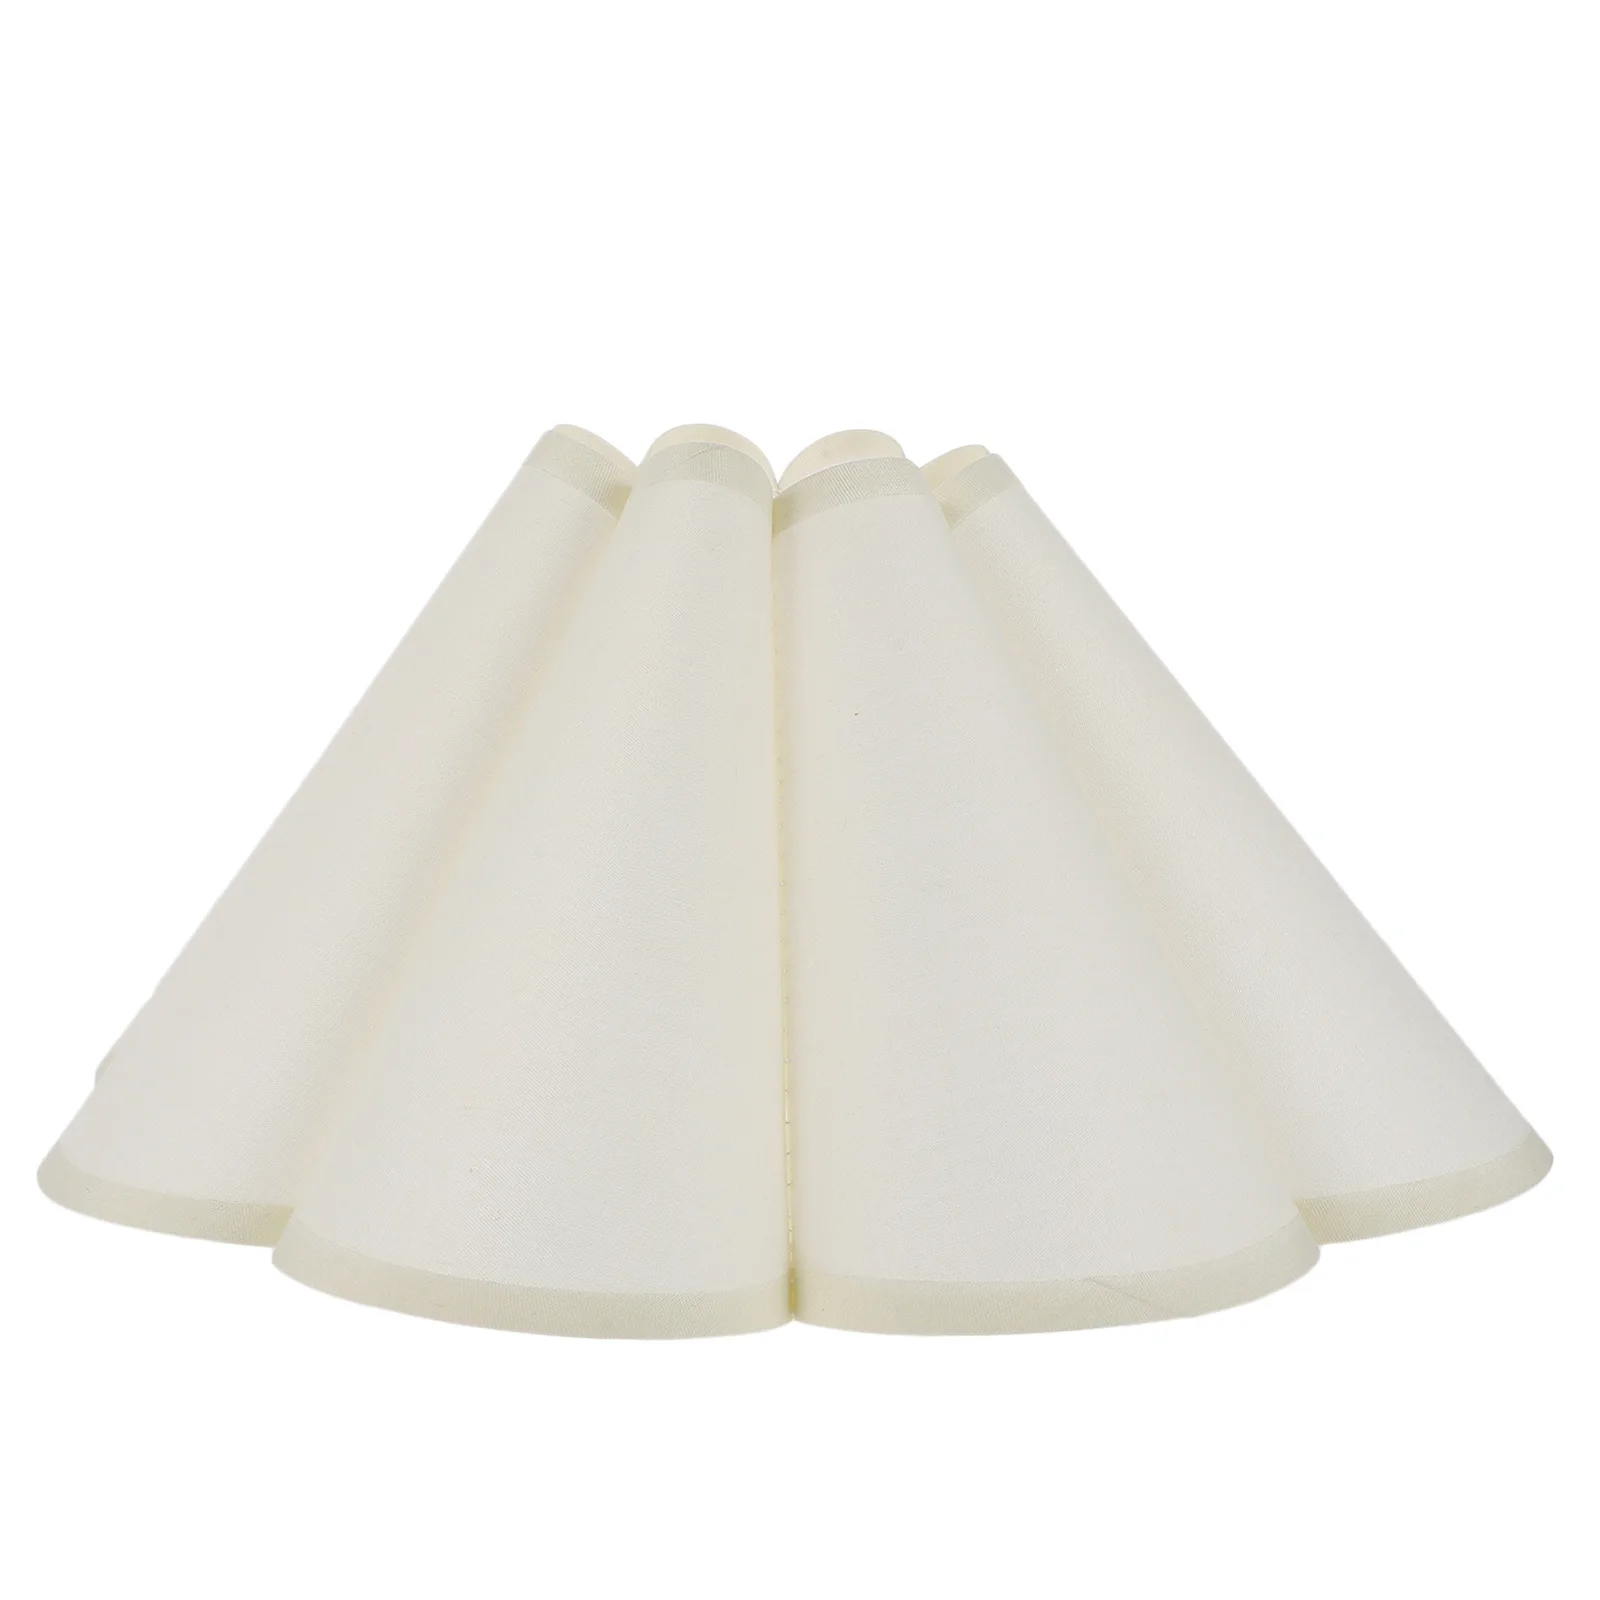 

Korean Style Lampshade Petal Light Cover Cloth Lampshade Flower Lamp Shades Light Table Ceiling Cover Replacement Chandelier